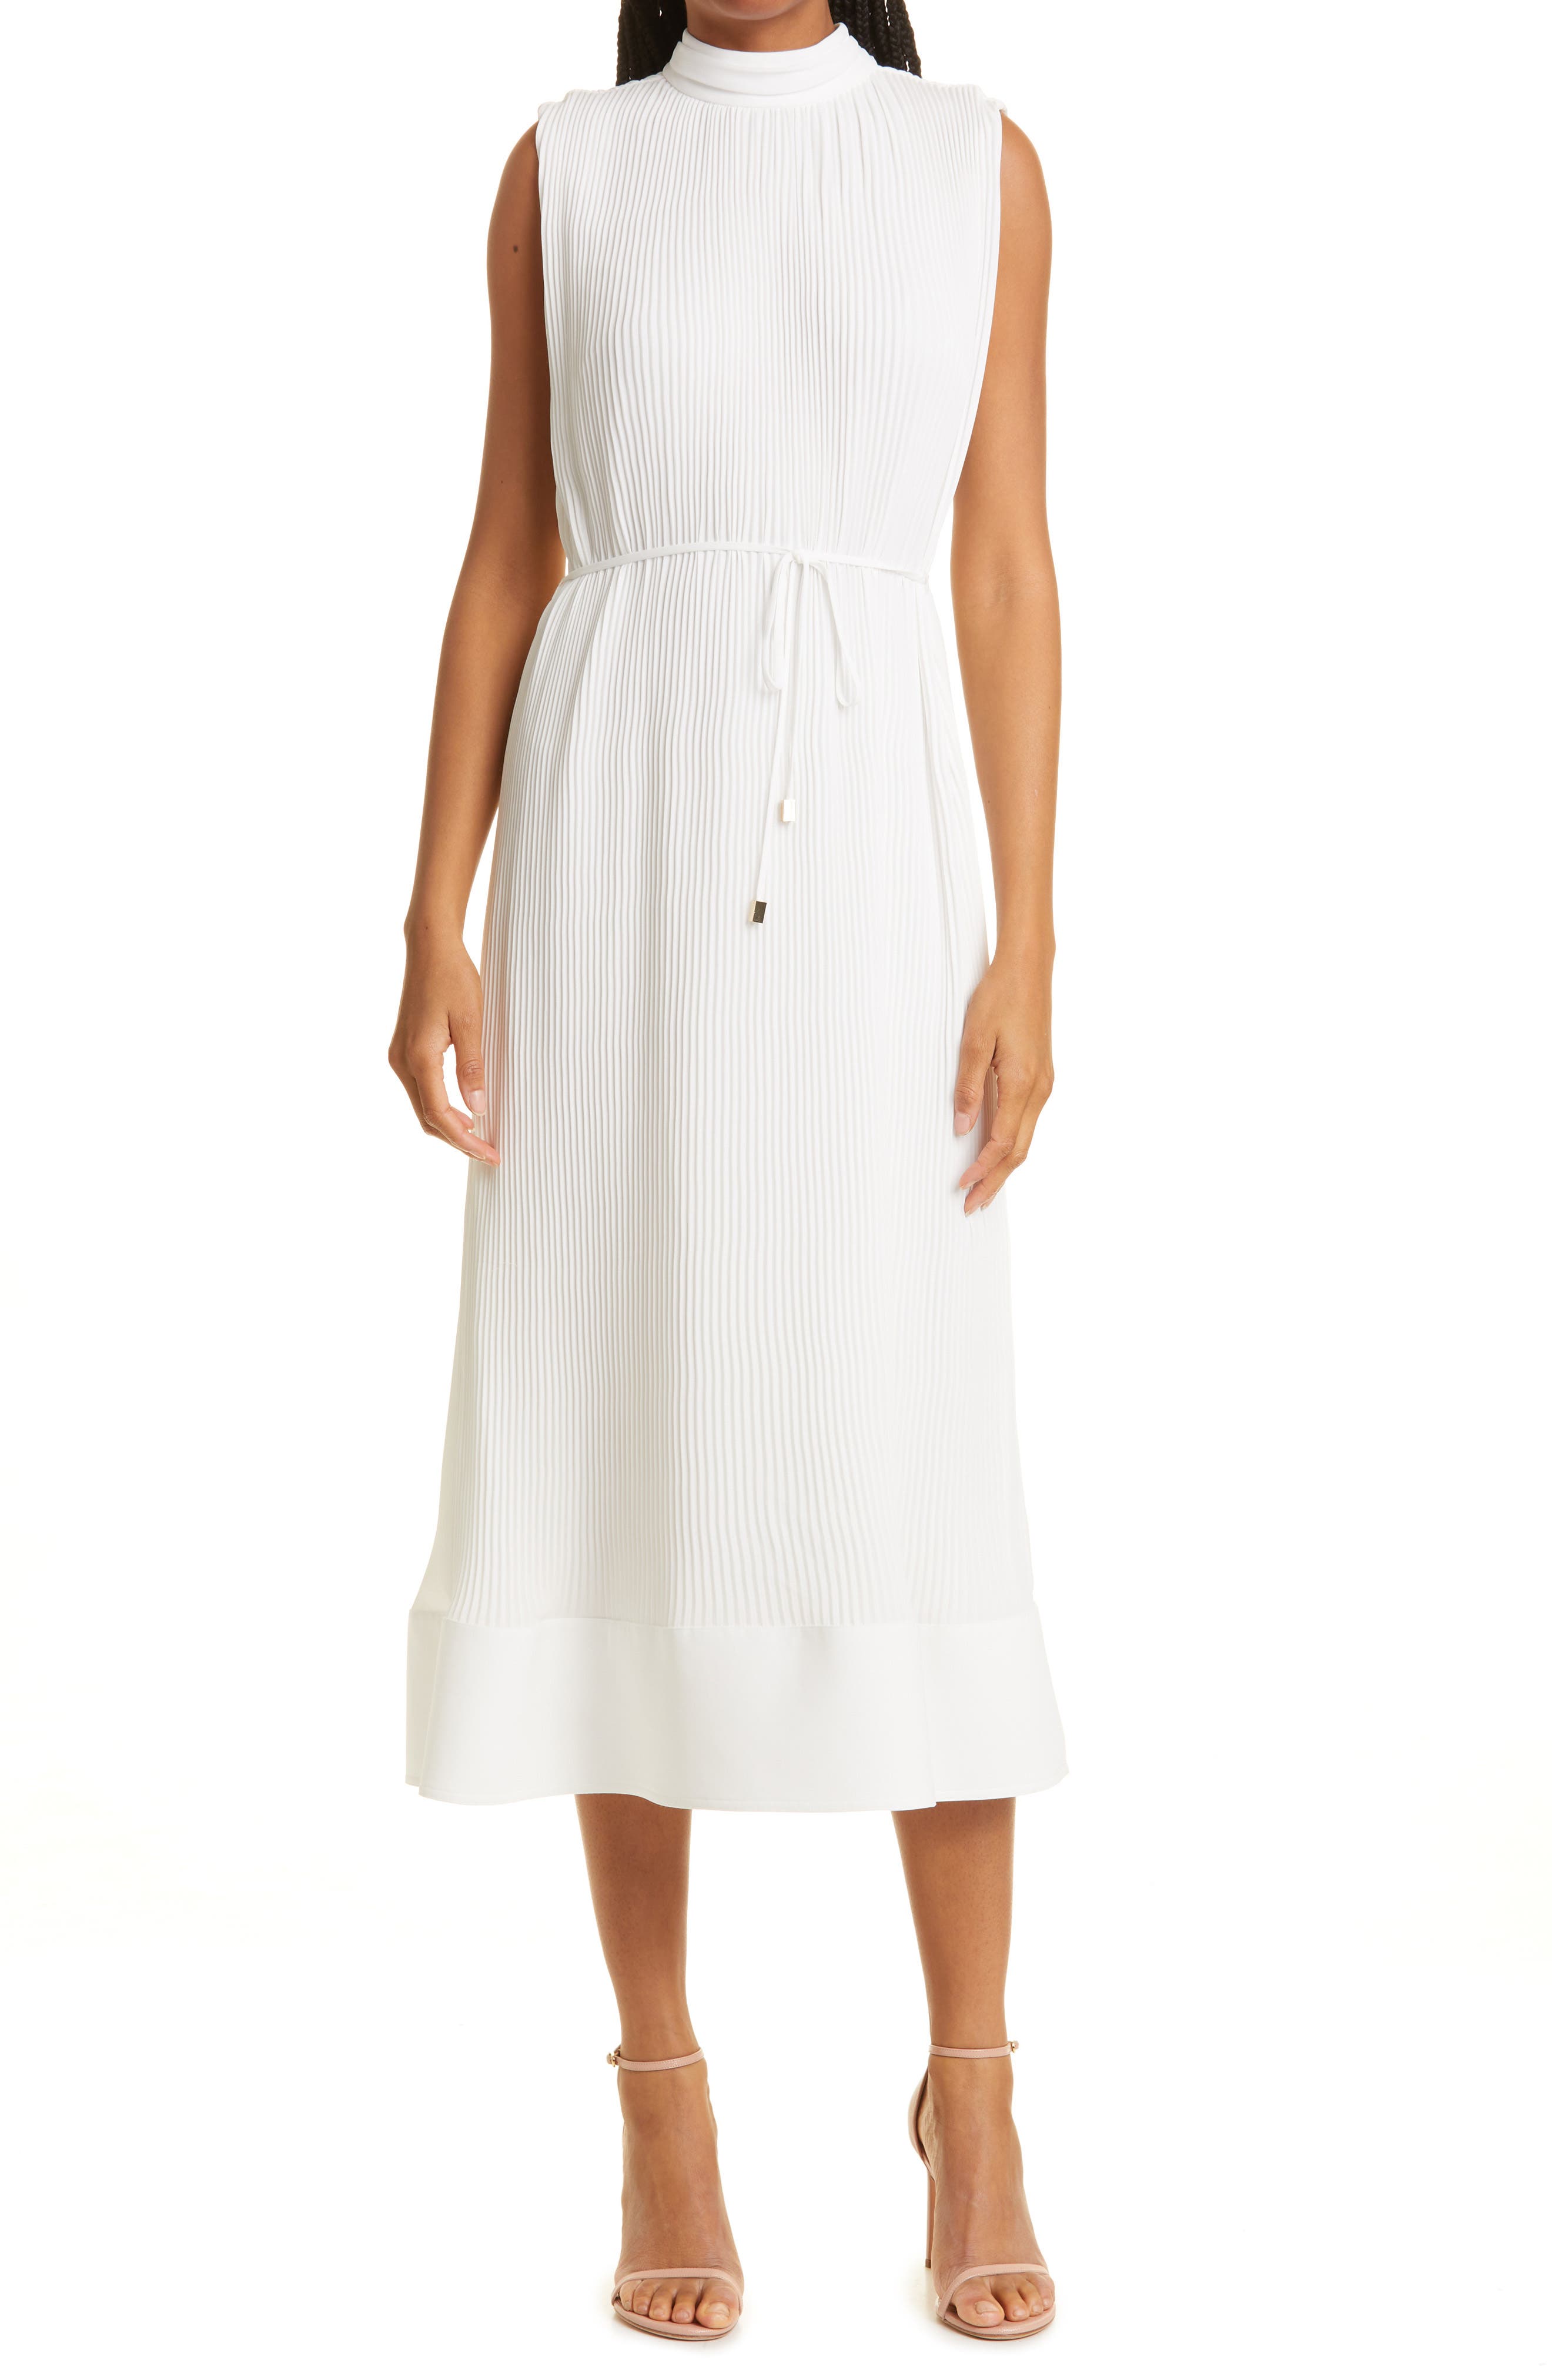 Milly Milina Micropleat Sleeveless ...